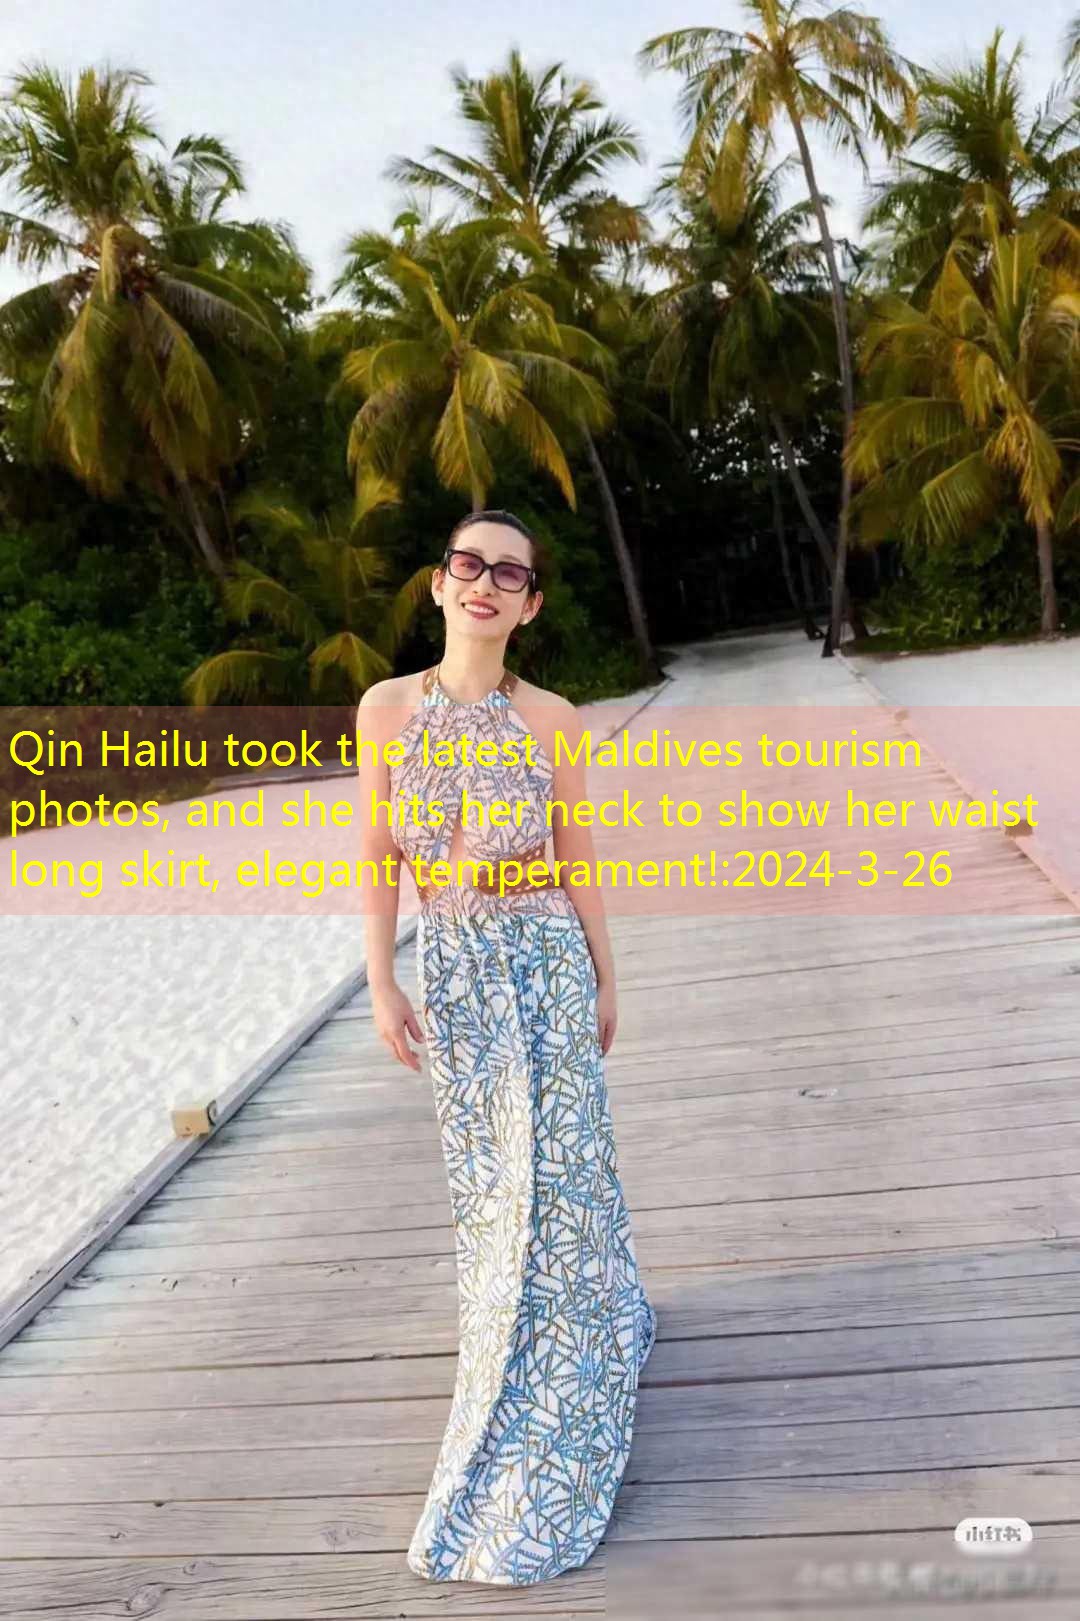 Qin Hailu took the latest Maldives tourism photos, and she hits her neck to show her waist long skirt, elegant temperament!